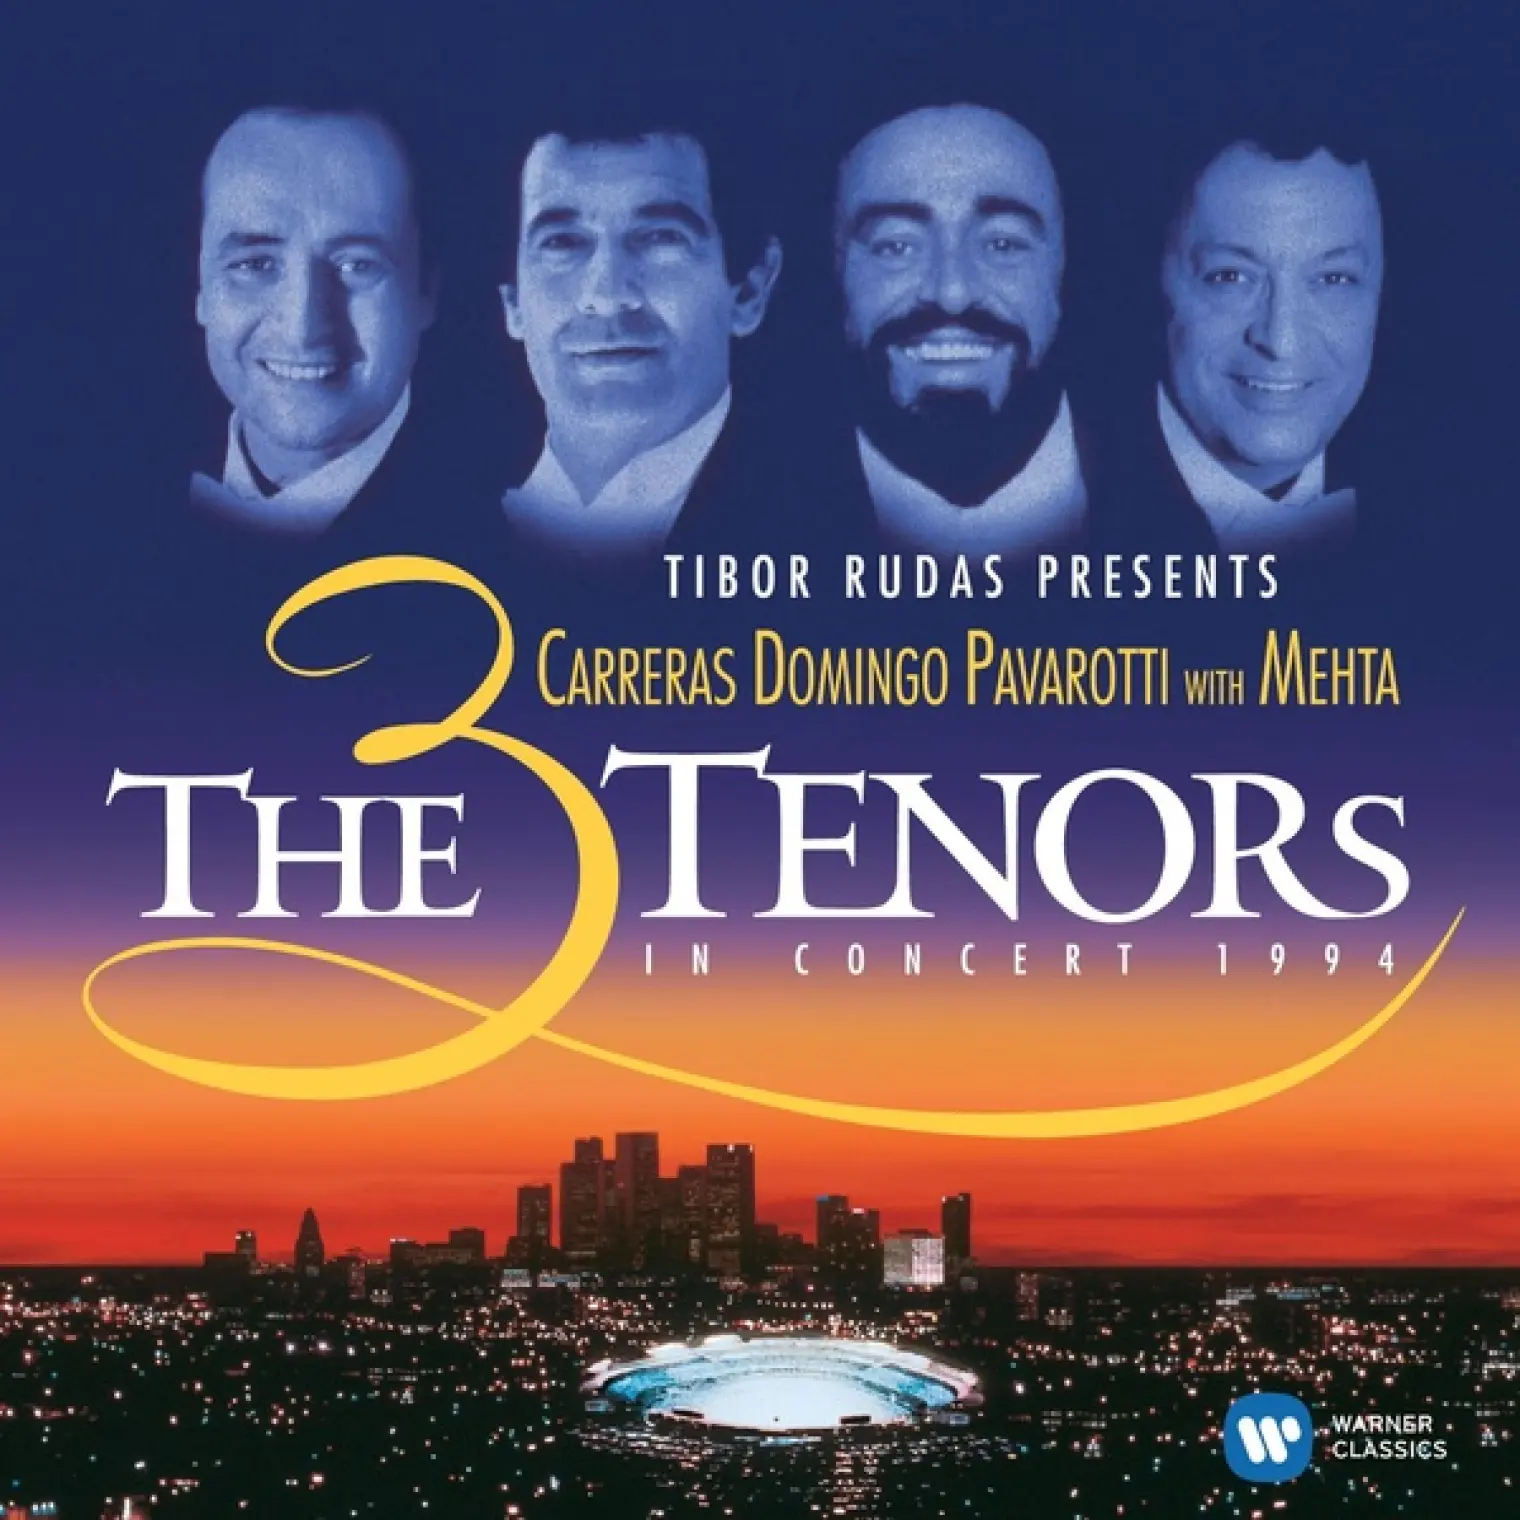 The Three Tenors in Concert, 1994 -  The Three Tenors 